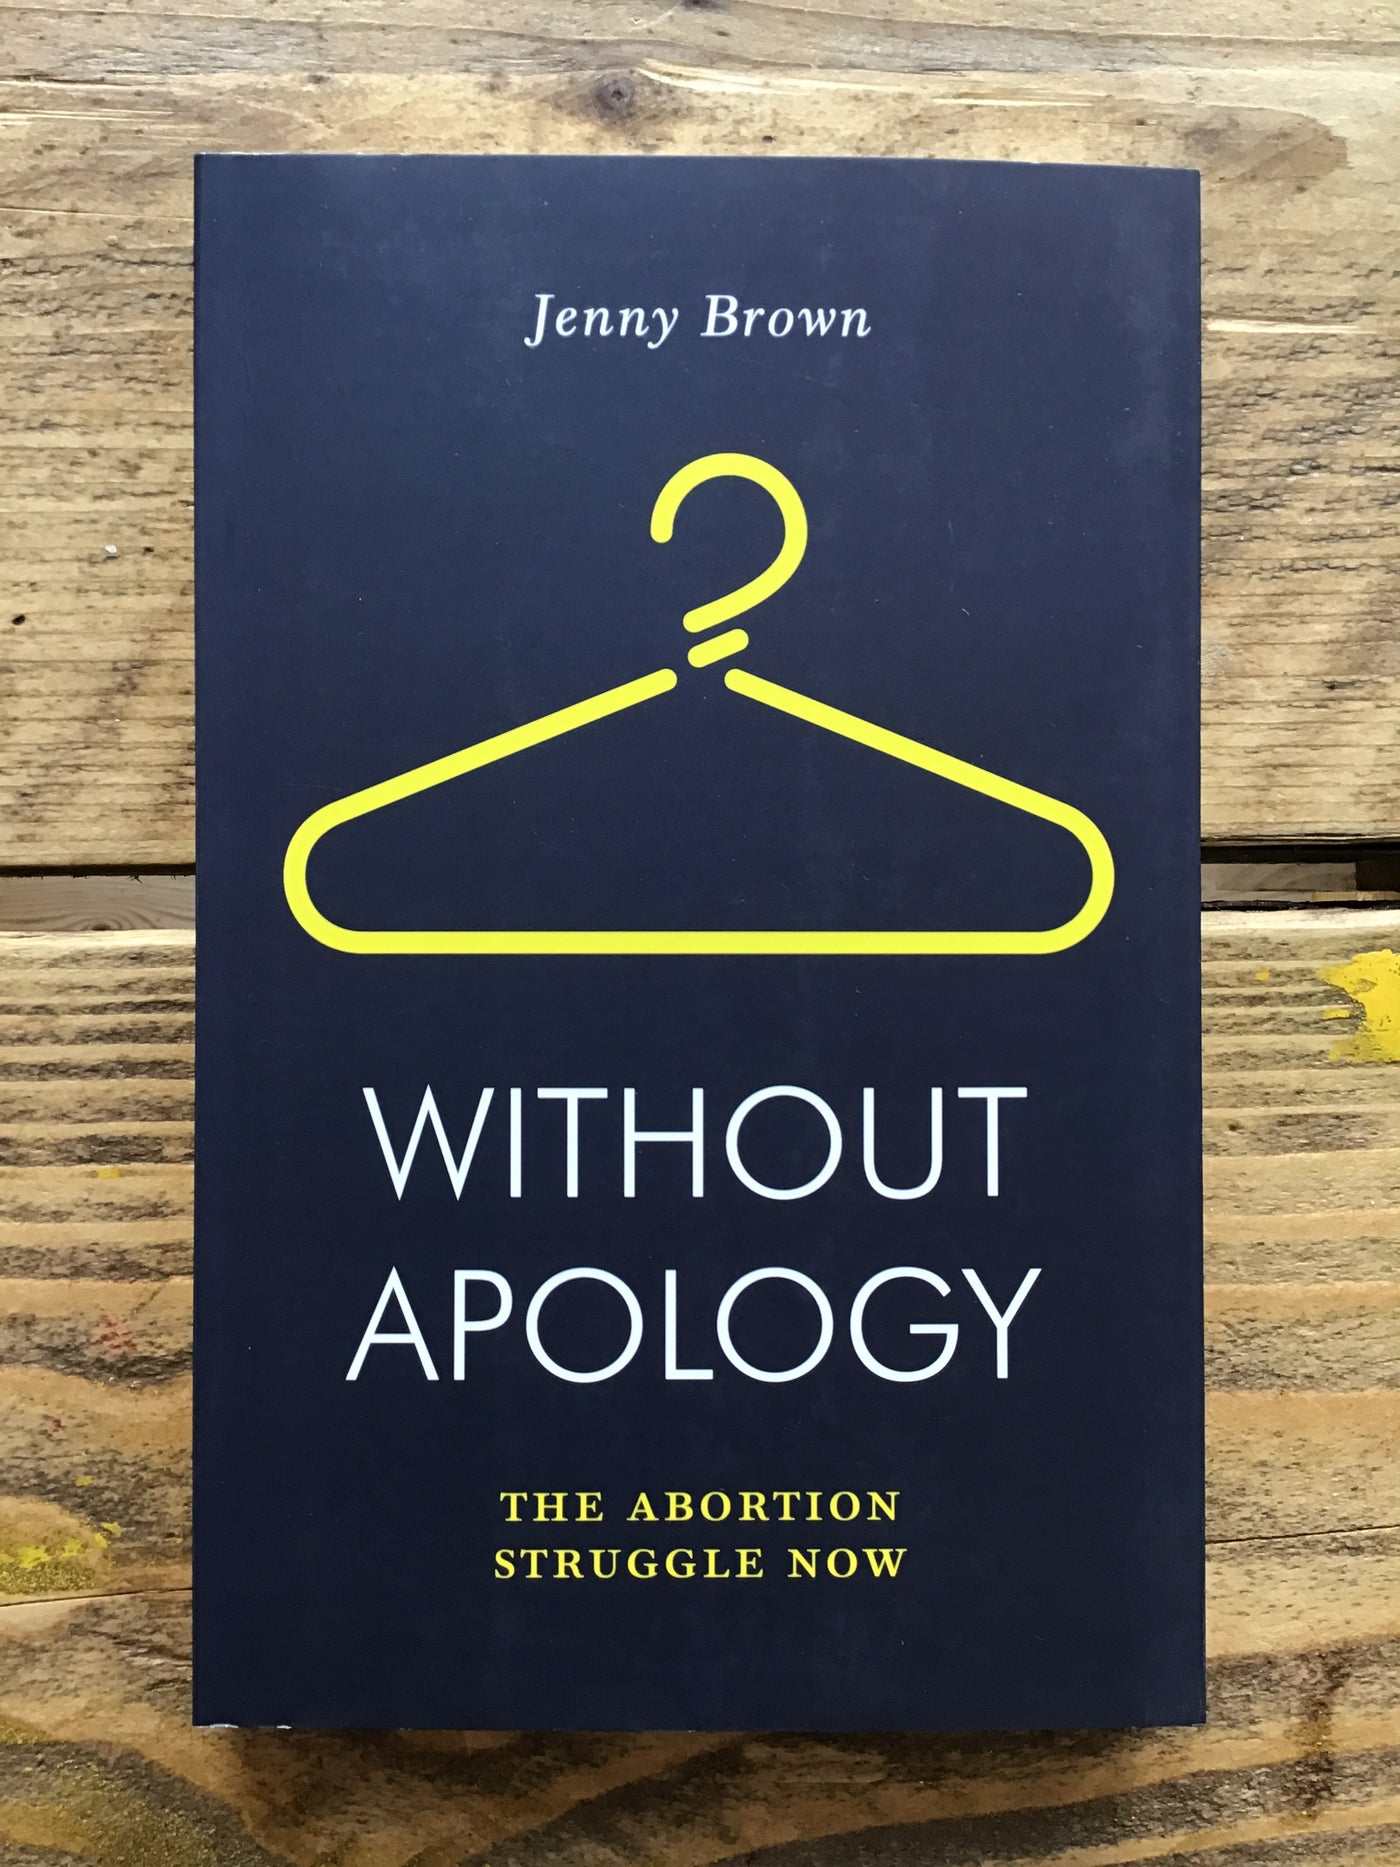 Without Apology